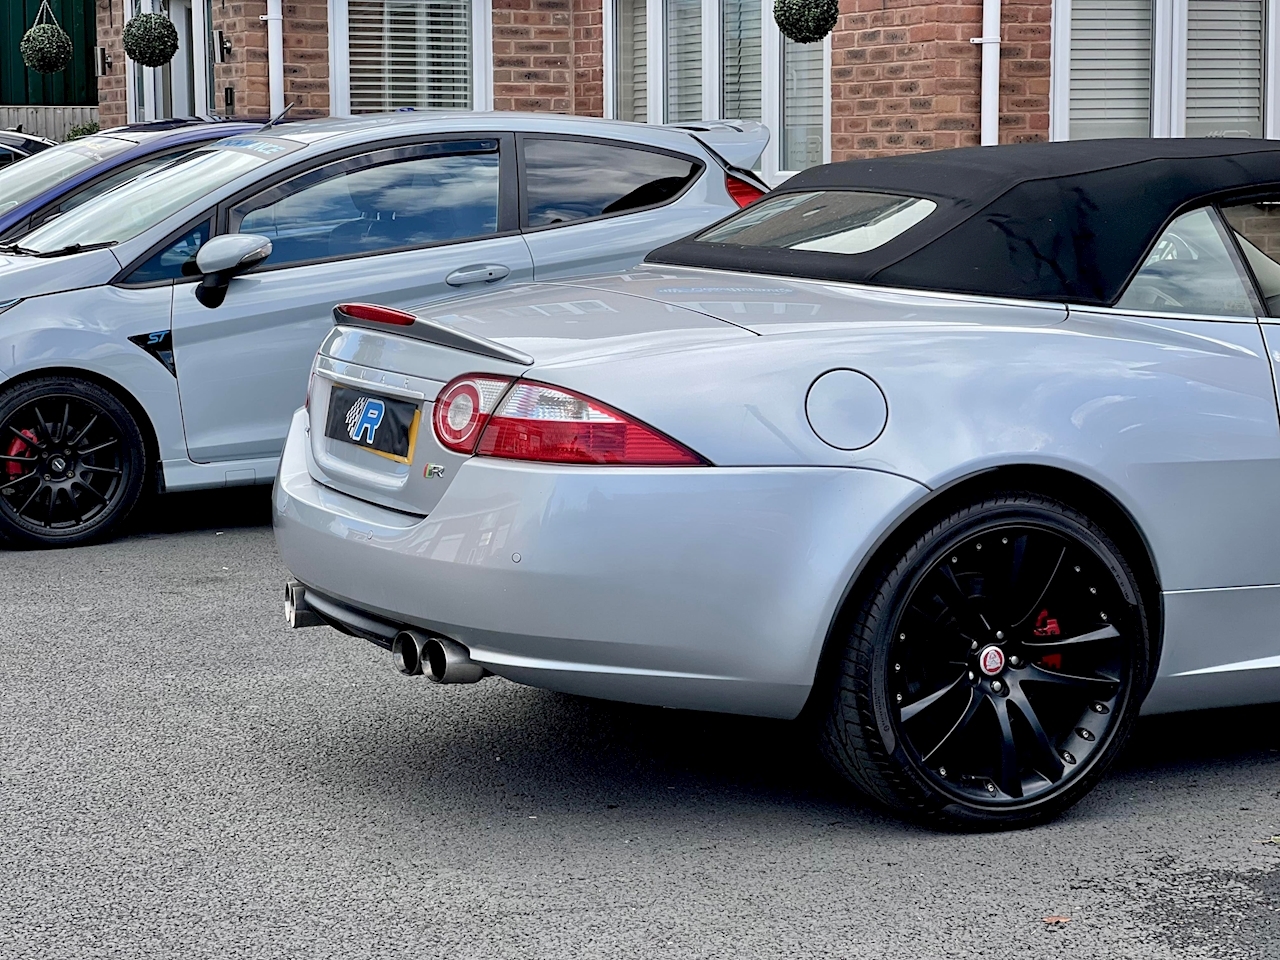 XKR 4.2 SUPERCHARGED 4.2 3dr Coupe Petrol